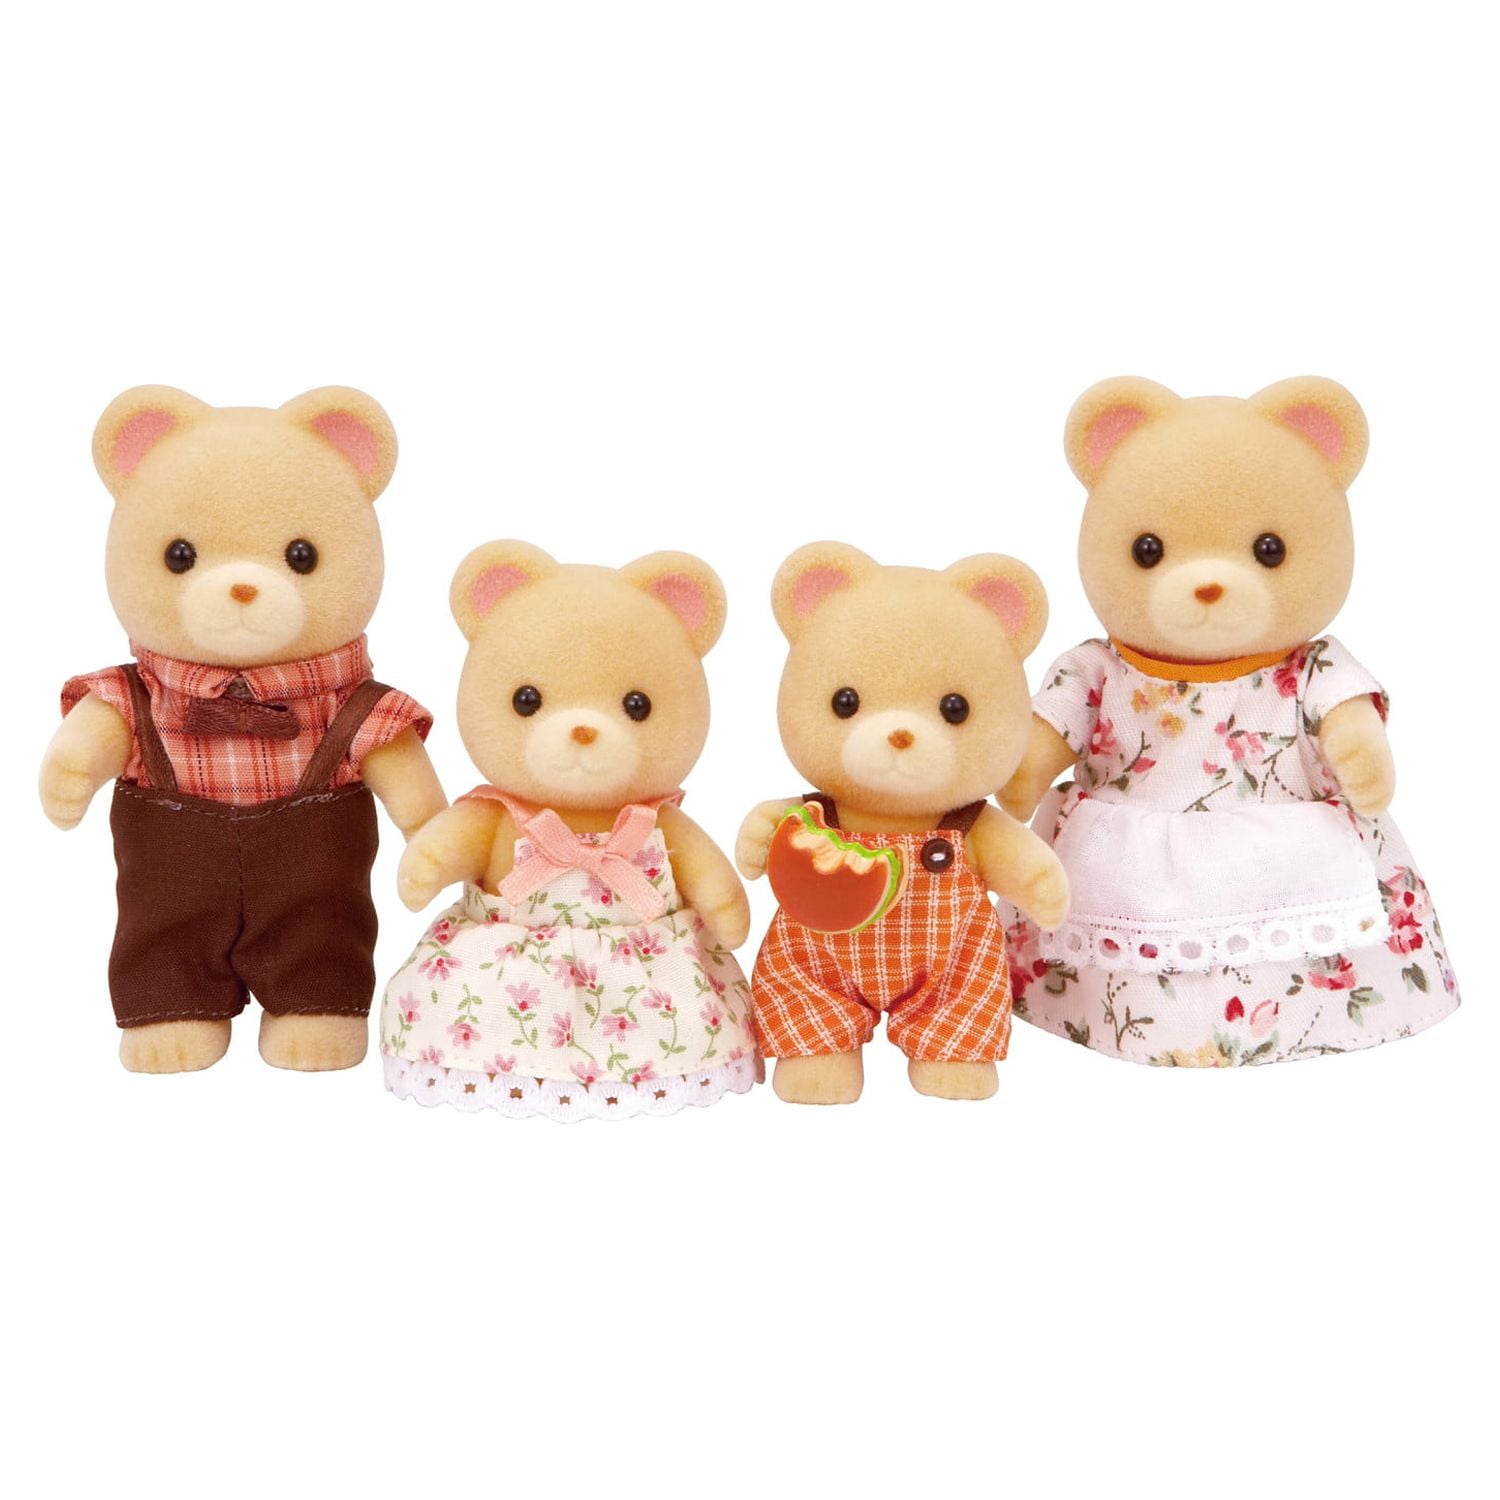 Calico Critters Baby Seashore Friends Blind Bag Figures Revealed